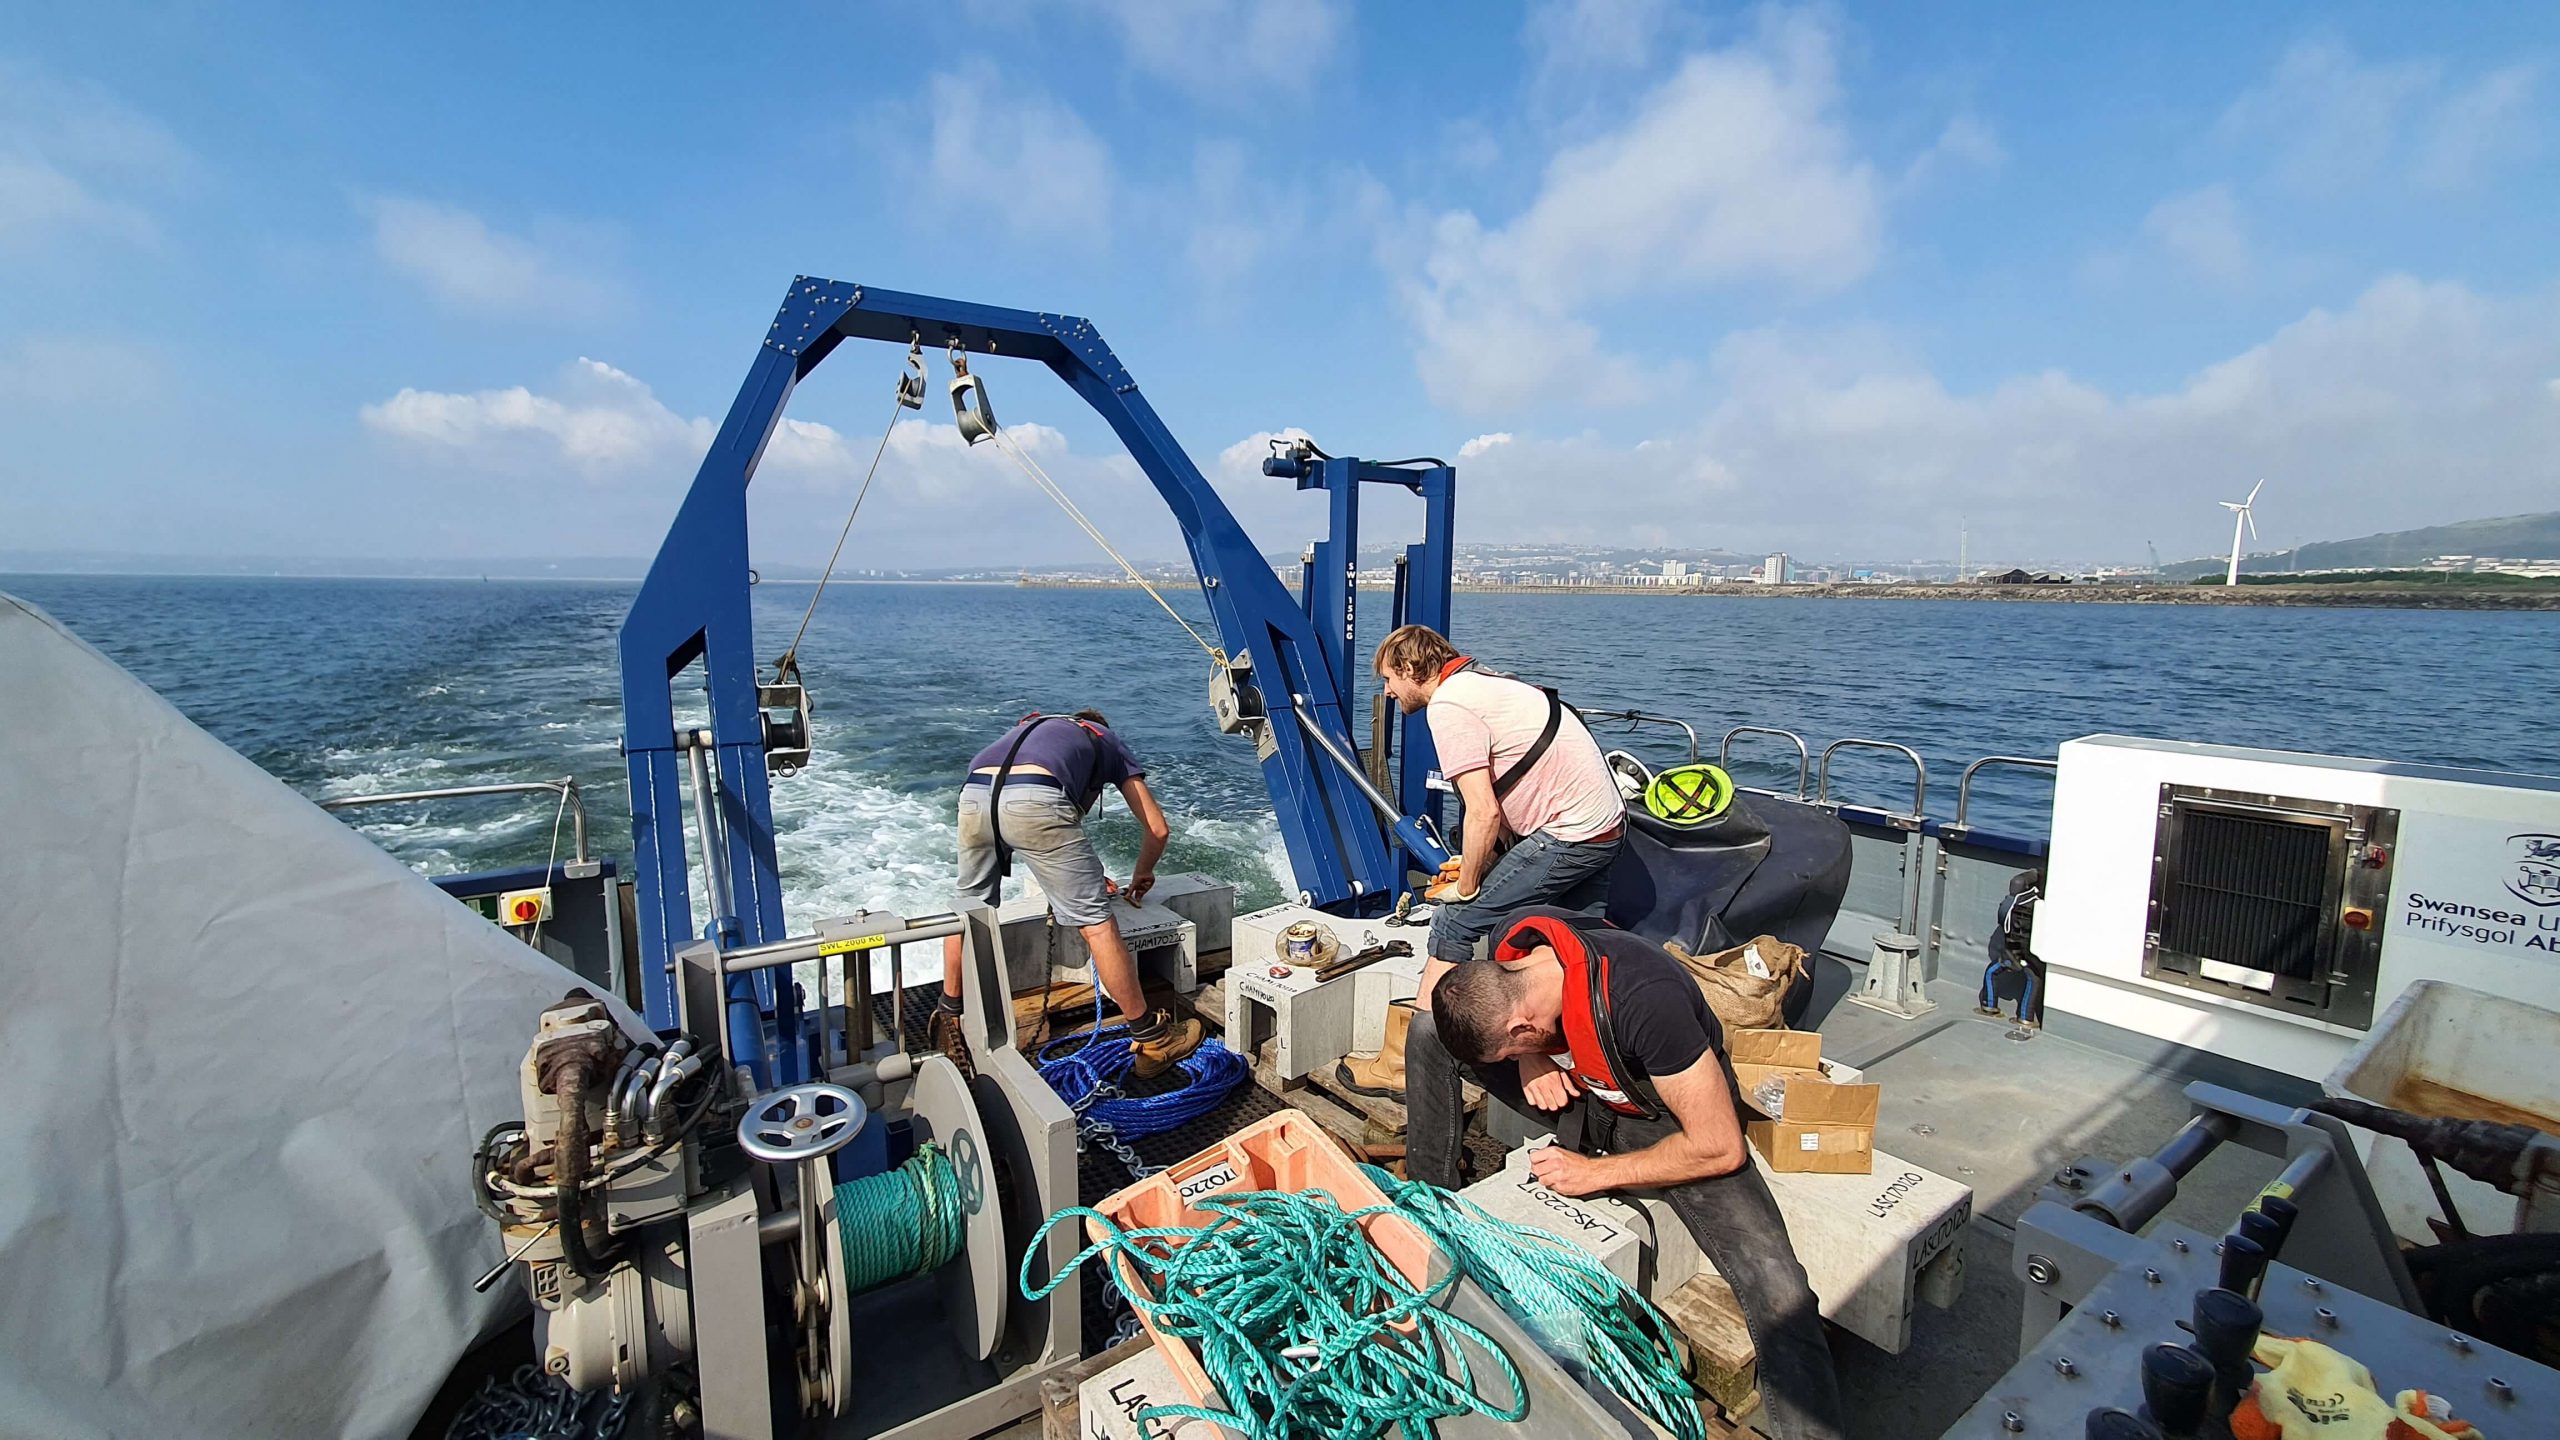 An eco-engineered lobster habitat unit designed by Ecostructure project researchers is ready for deployment in the Irish Sea.